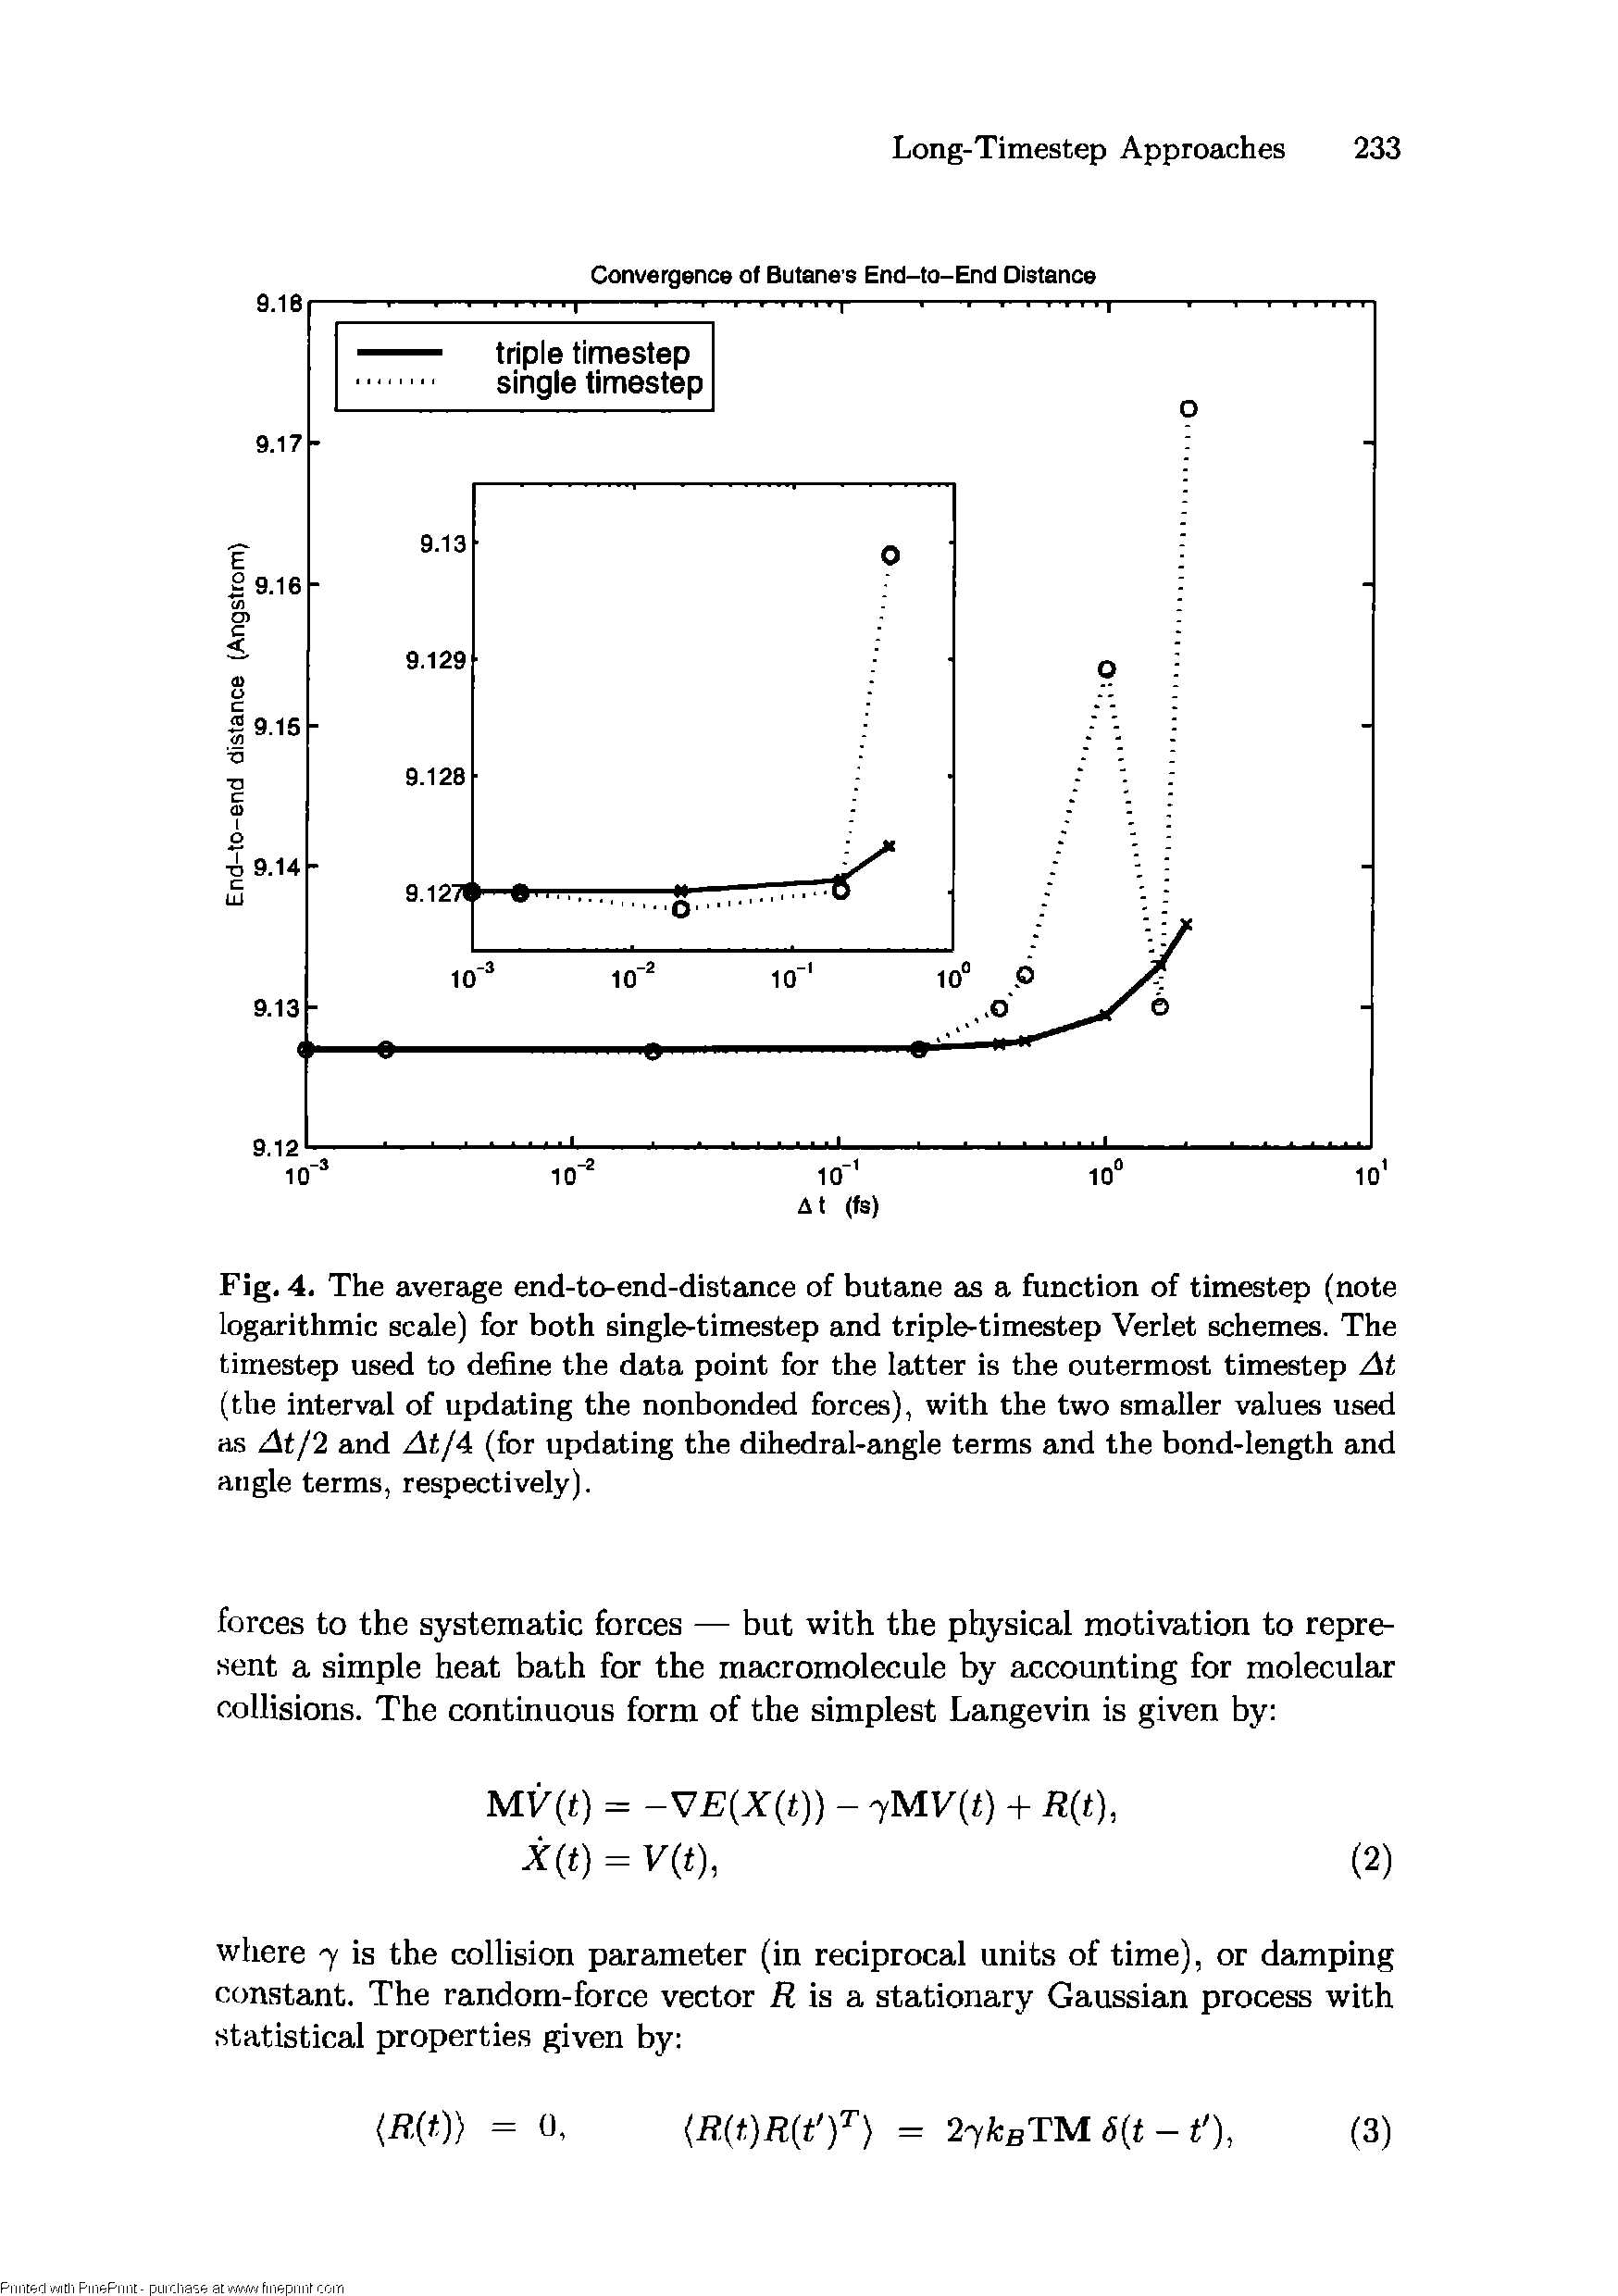 Fig. 4. The average end-to-end-distance of butane as a function of timestep (note logarithmic scale) for both single-timestep and triple-timestep Verlet schemes. The timestep used to define the data point for the latter is the outermost timestep At (the interval of updating the nonbonded forces), with the two smaller values used as Atj2 and At/A (for updating the dihedral-angle terms and the bond-length and angle terms, respectively).